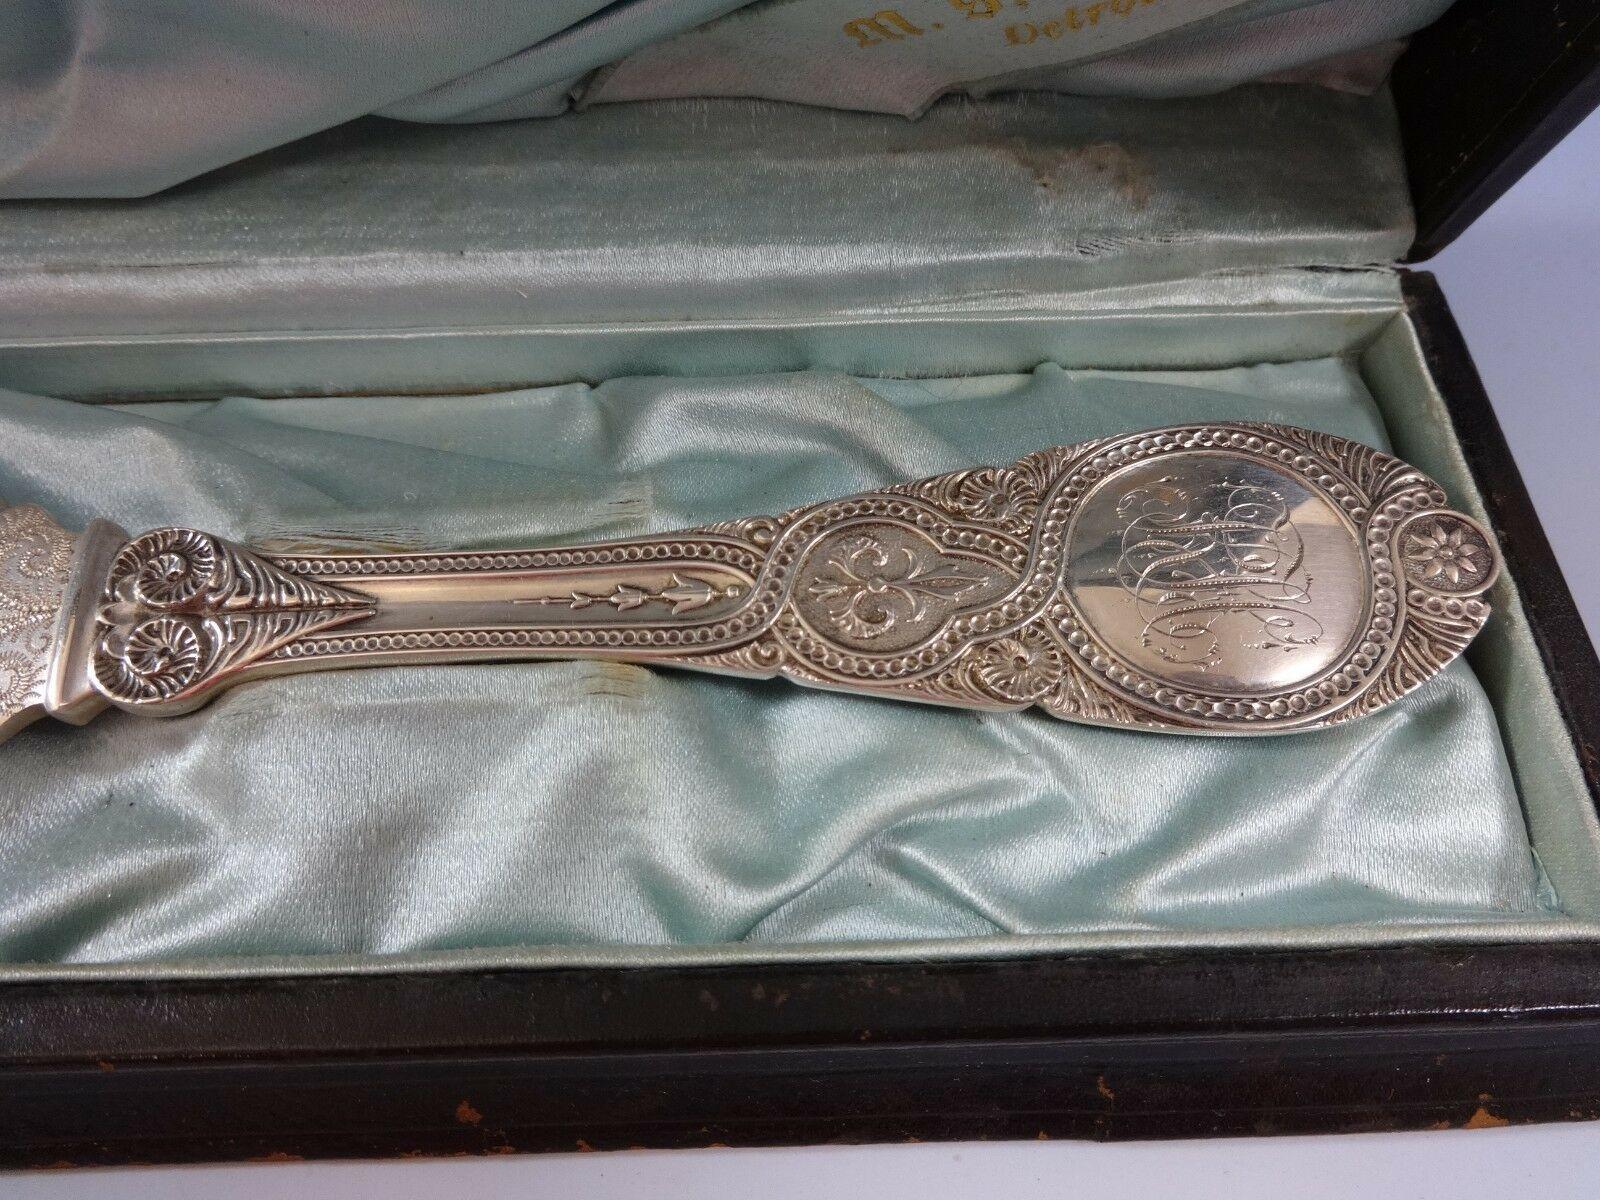 Moresque by Wendt

Moresque by Wendt serrated cake knife in original fitted box, all-sterling, 12”, monogrammed, circa 1873. Bright-cut leaves, bamboo, and bird on blade. Large, heavy, and impressive. Interior of box, excellent. Exterior of box,